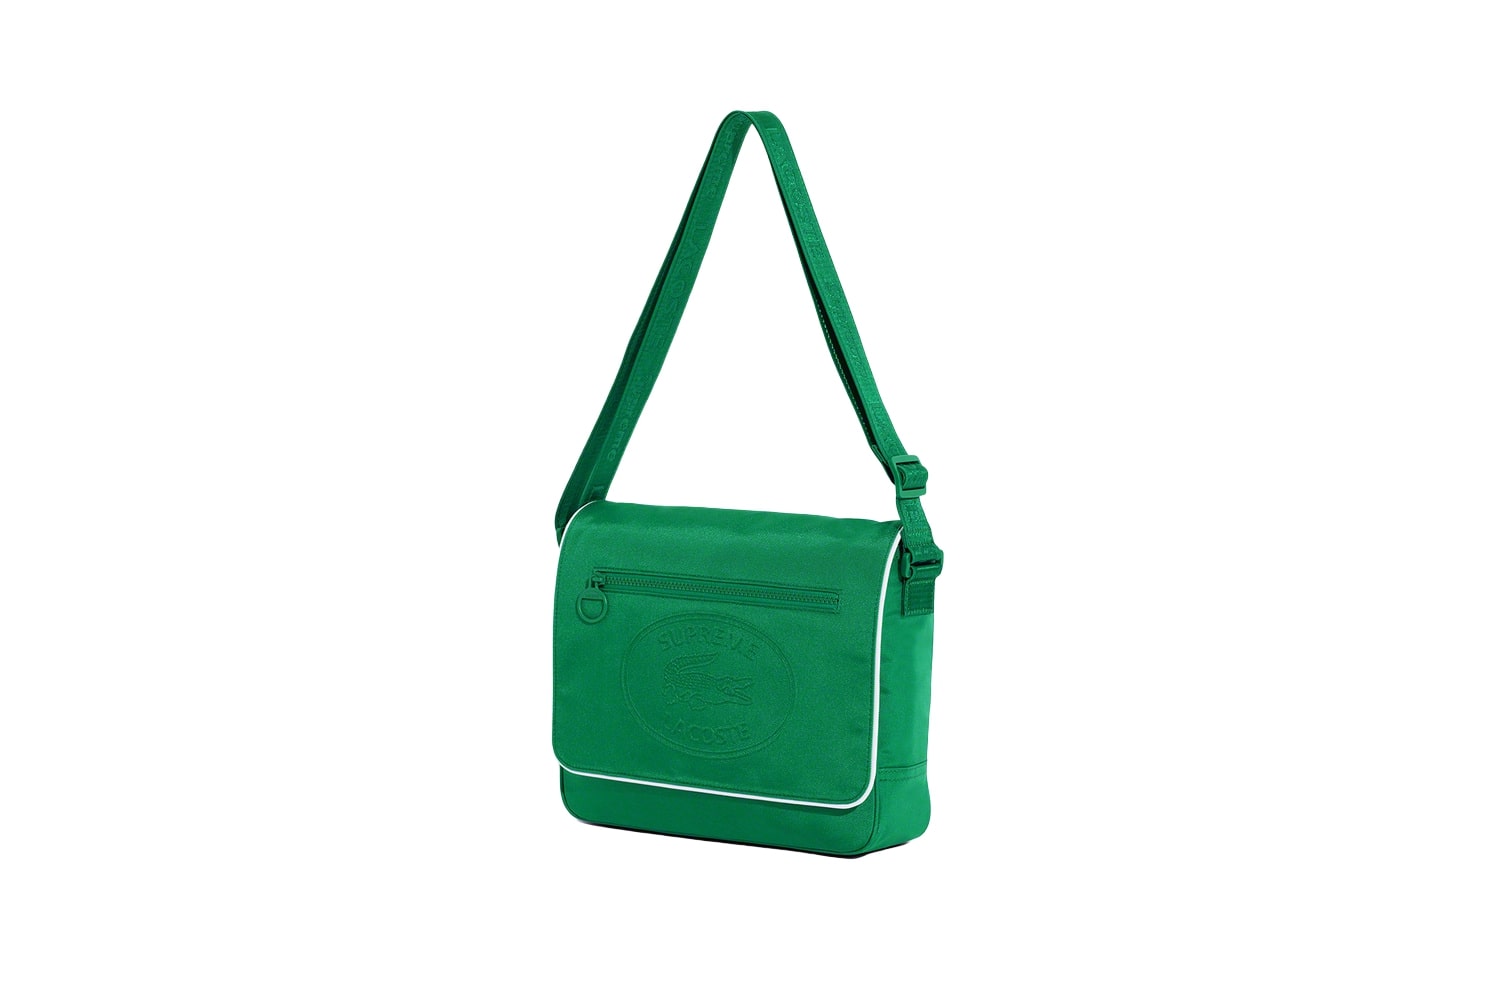 lacoste small messenger bag